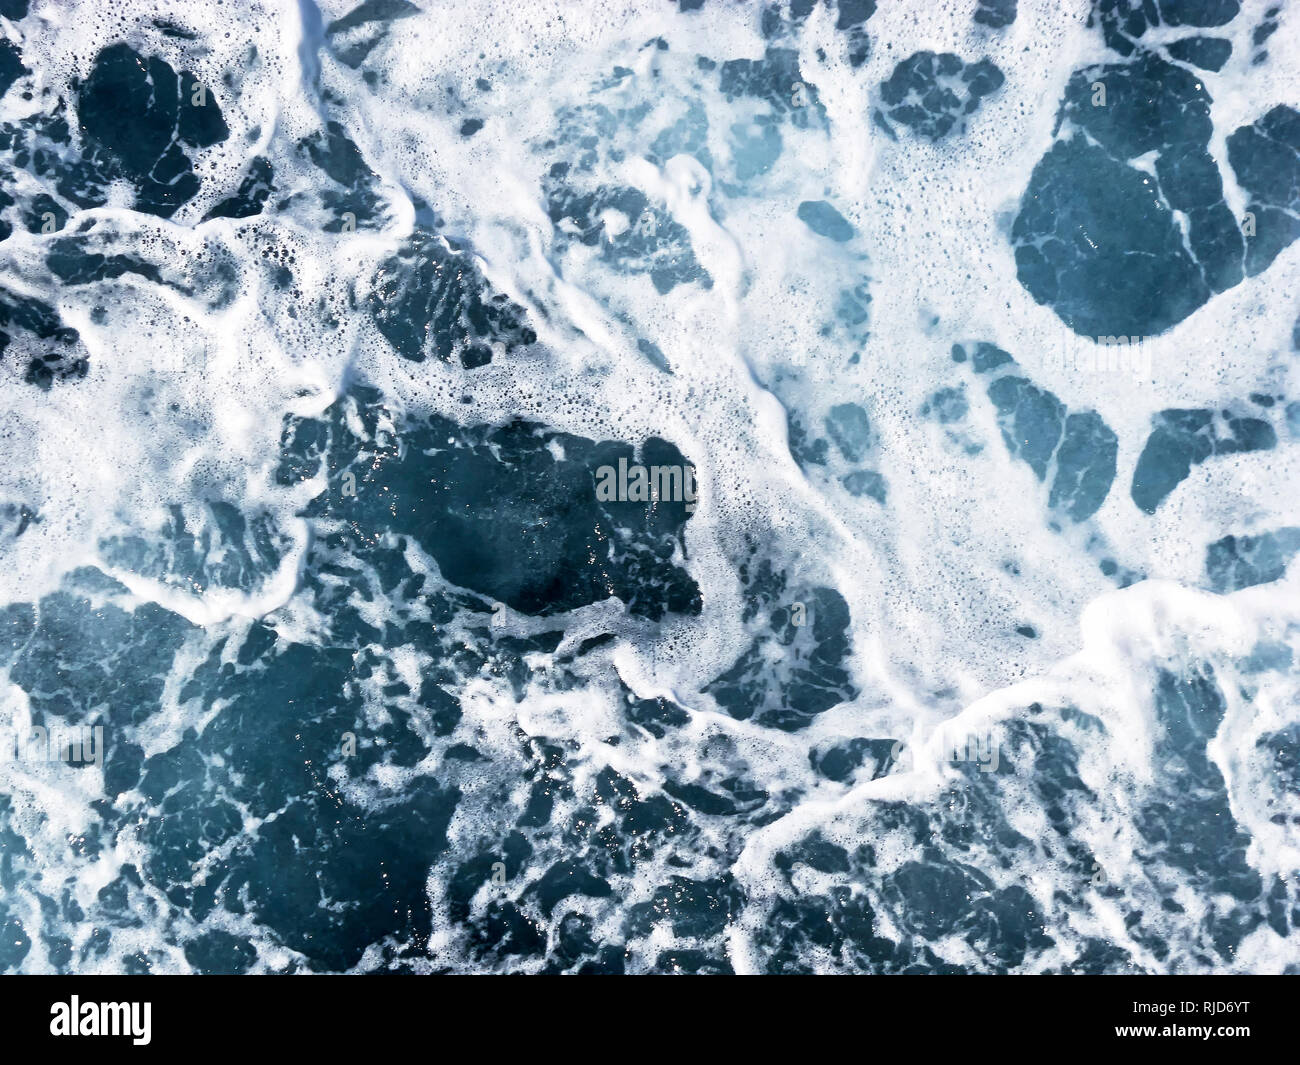 Close-up photo of seawater photographed from above a cruise ship in the Philippines Stock Photo